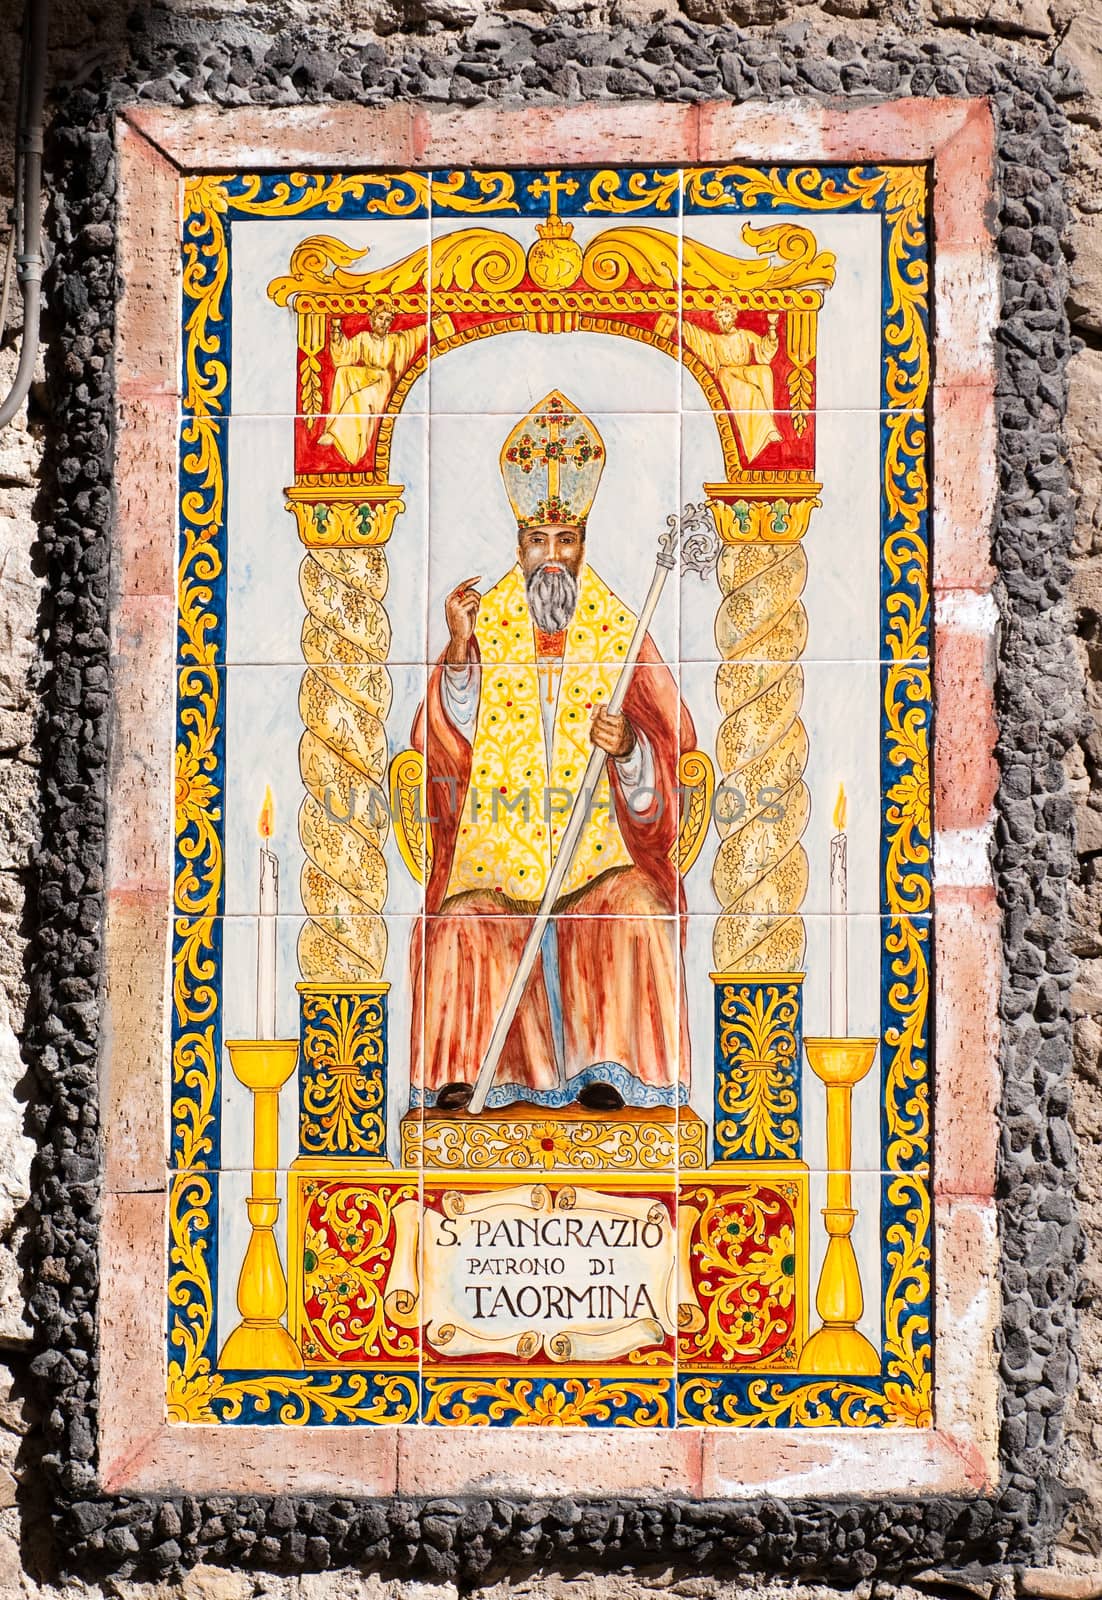 "San Pancrazio - Patron of Taormina" Art ceramic pictures on the wall of house in Taormina, Sicily, Italy